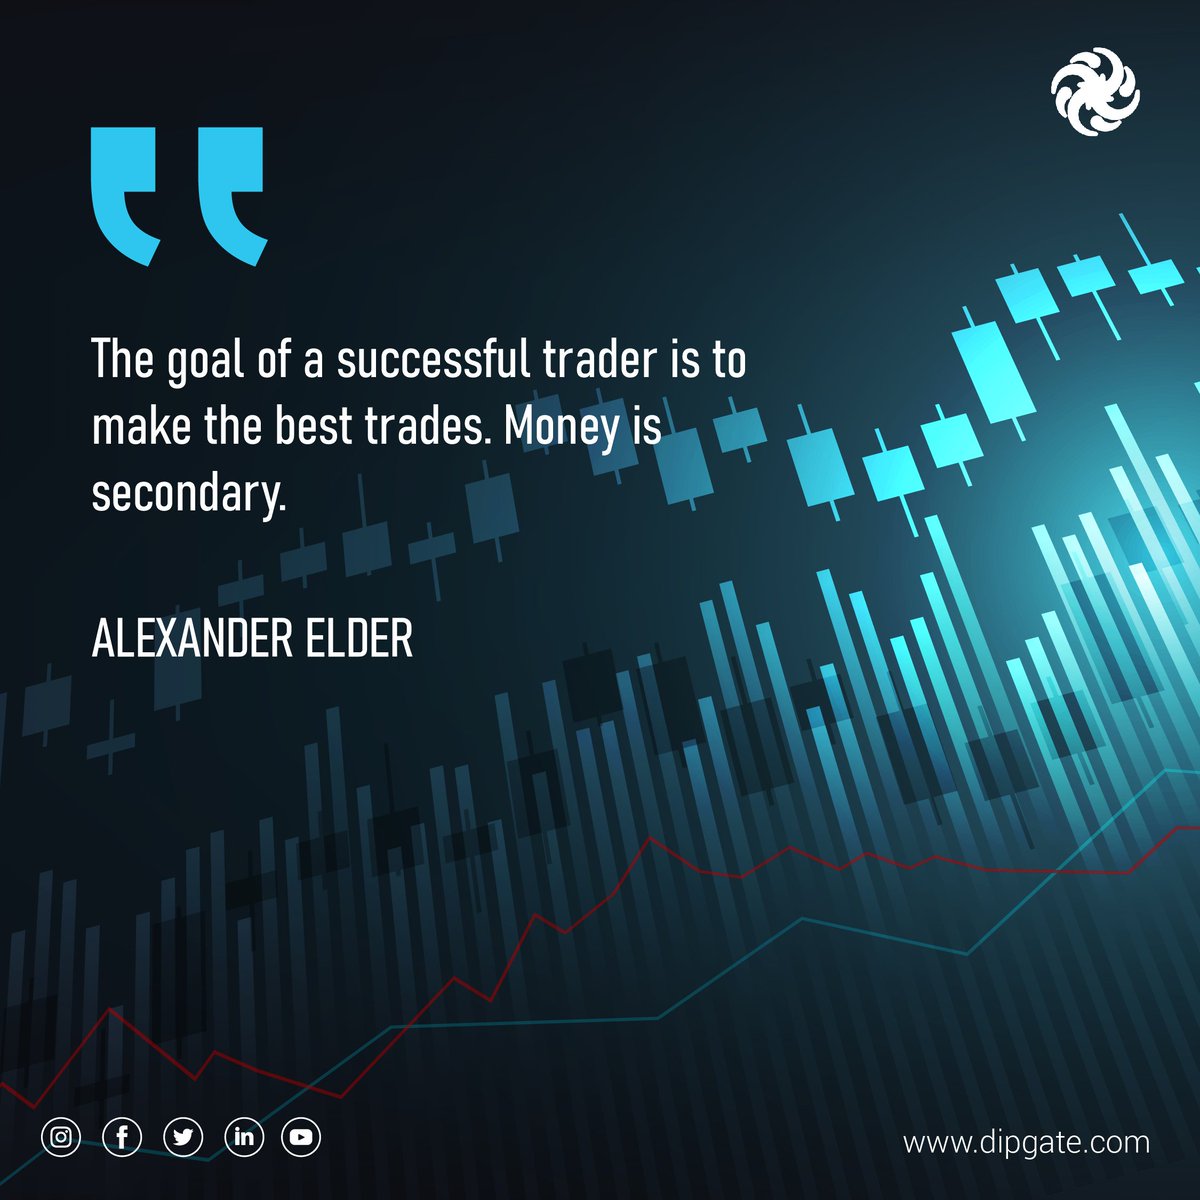 Wise Words from #AlexanderElder! 📈💡The true goal of a #SuccessfulTrader is not just making money, but rather making the best possible trades 💼🔝⁣
⁣
#TradingQuotes #TradingWisdom #TradingGoals #MoneyManagement #TradeSmart #TradingMindset #TradingStrategies